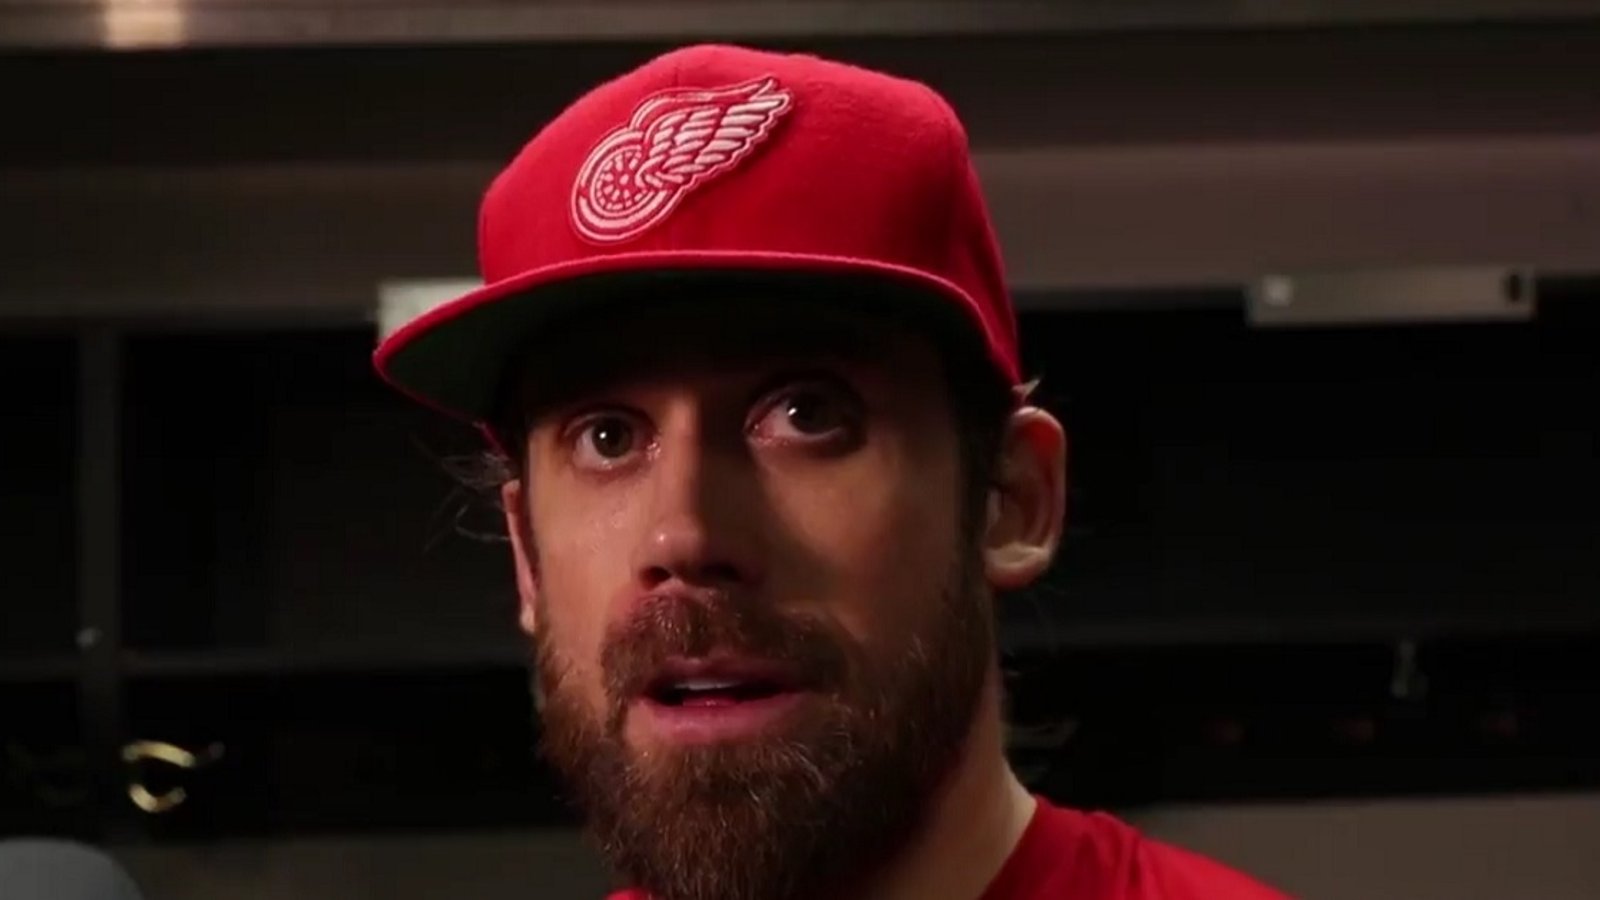 Breaking: An extremely emotional Zetterberg speaks to the media.